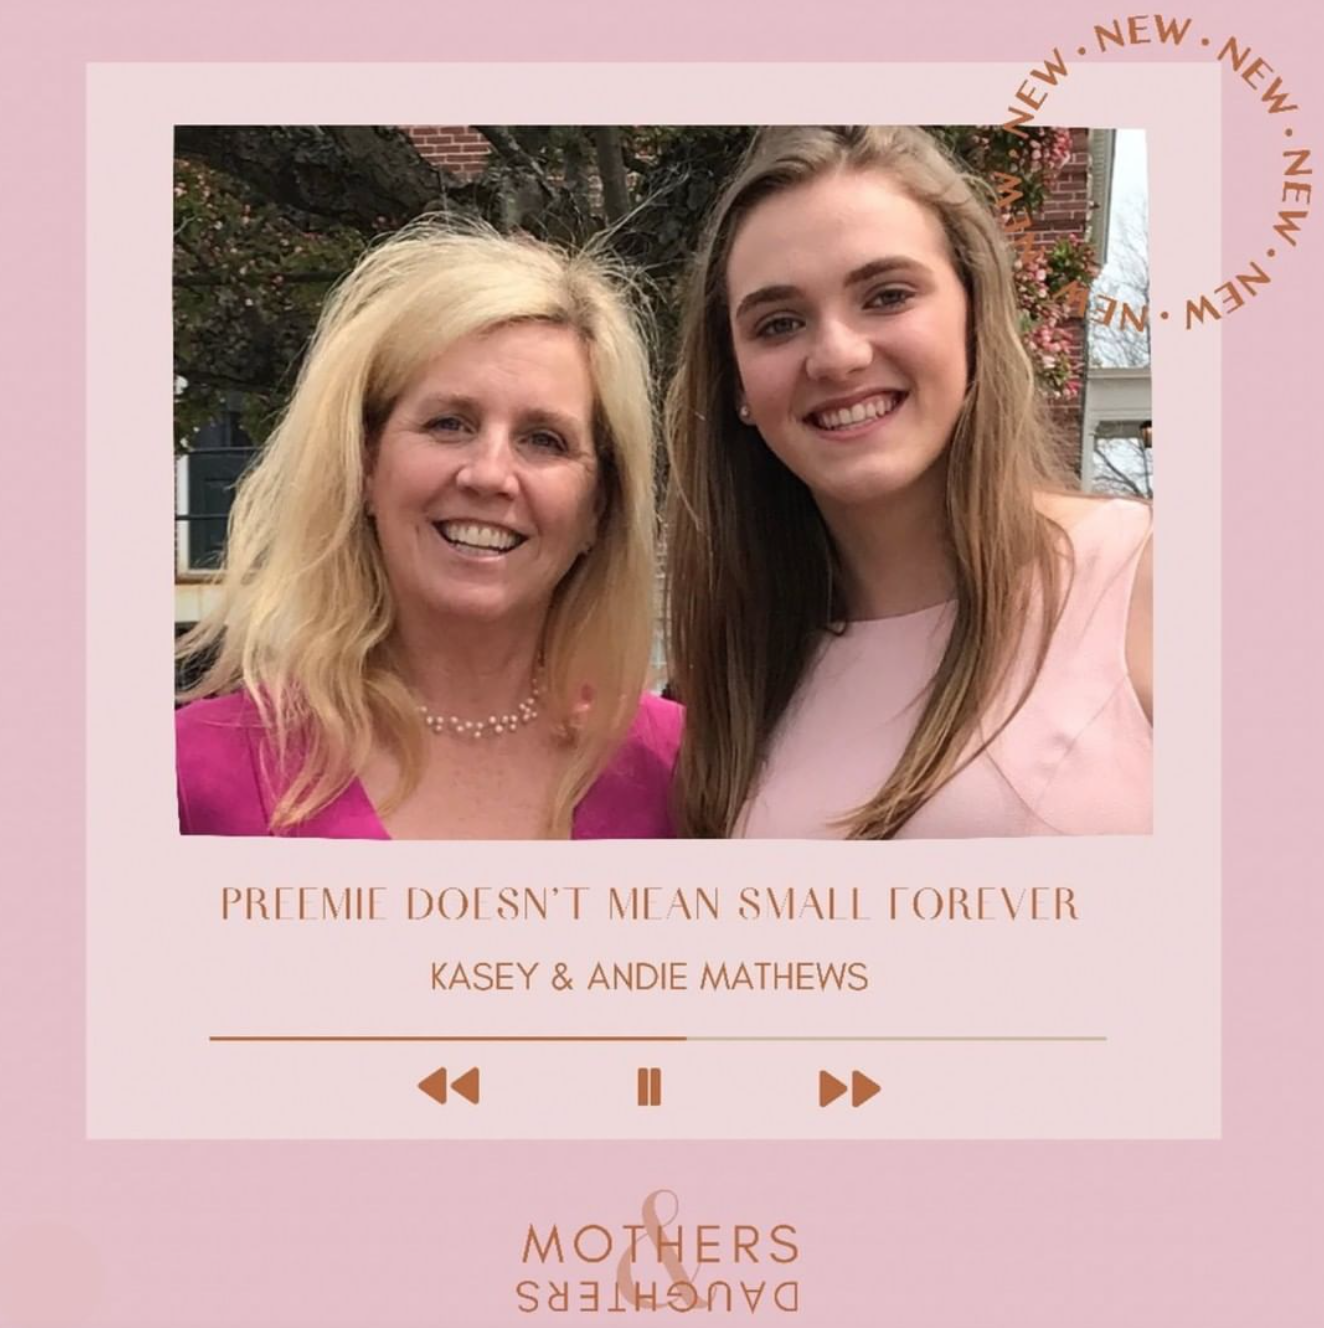 Preemie Doesn't Mean Small Forever, Kasey & Andie Mathews on Mothers & Daughters Podcast